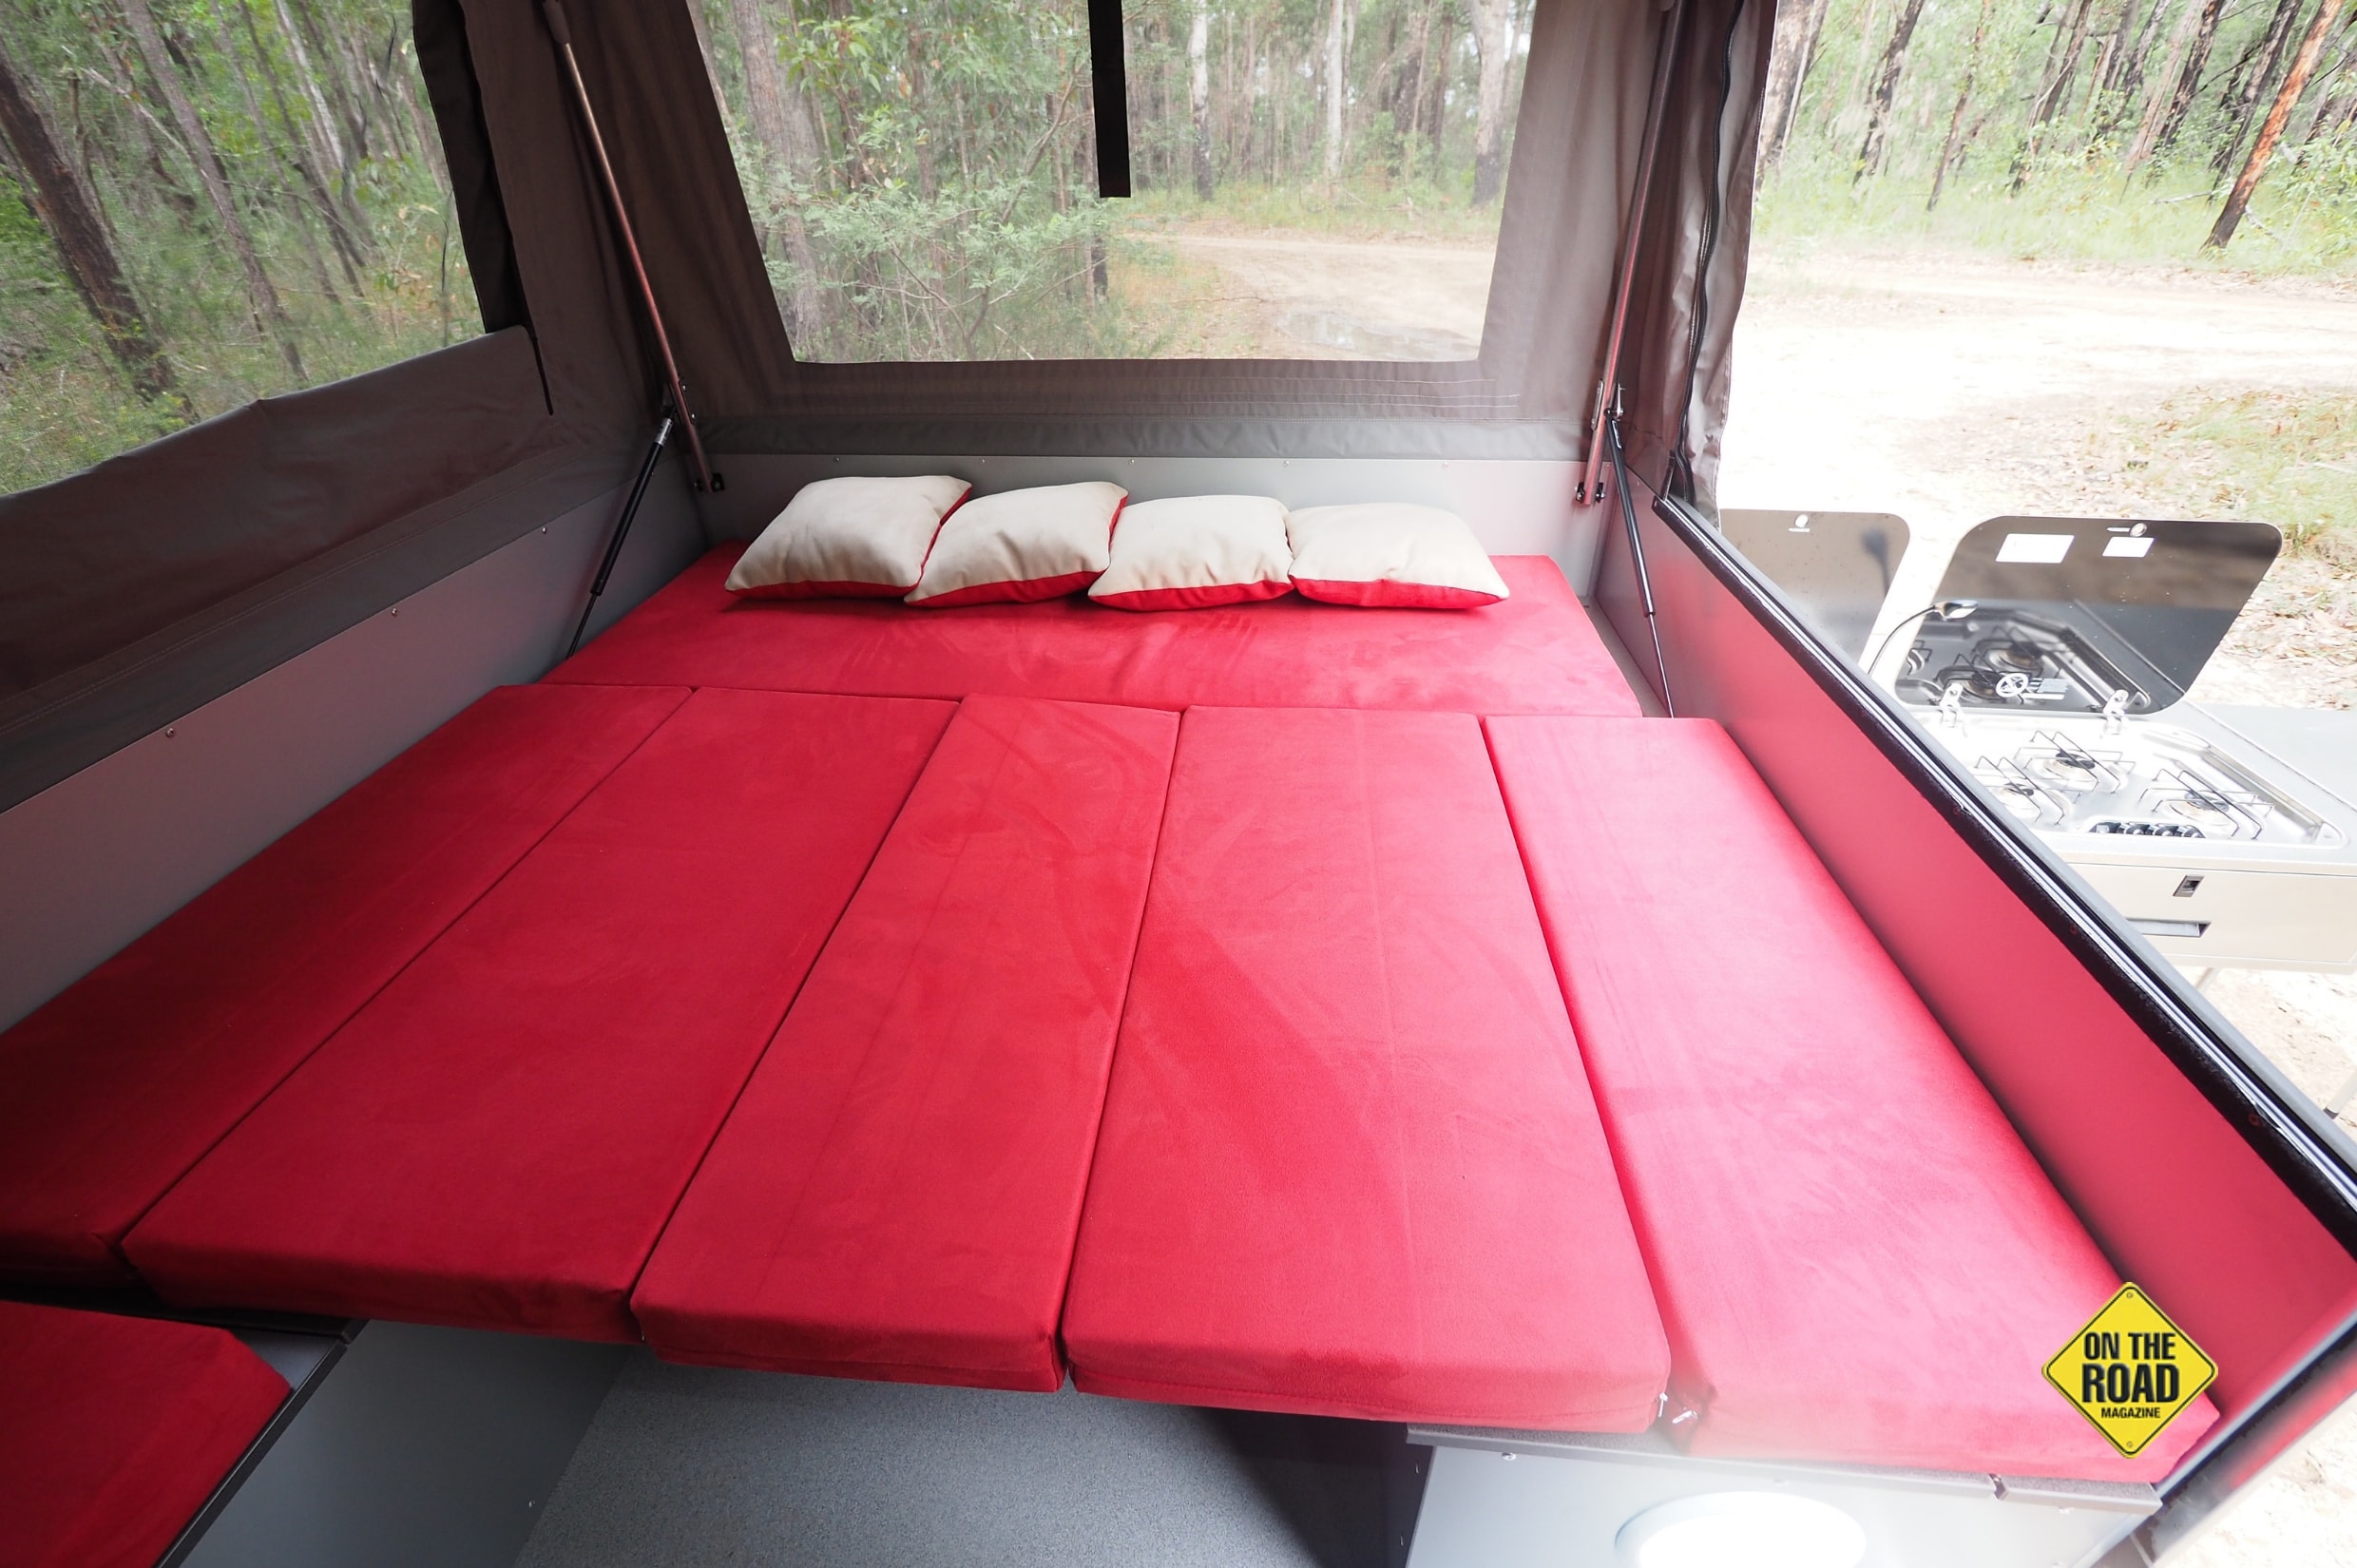 The dinette can be converted into a bed-min